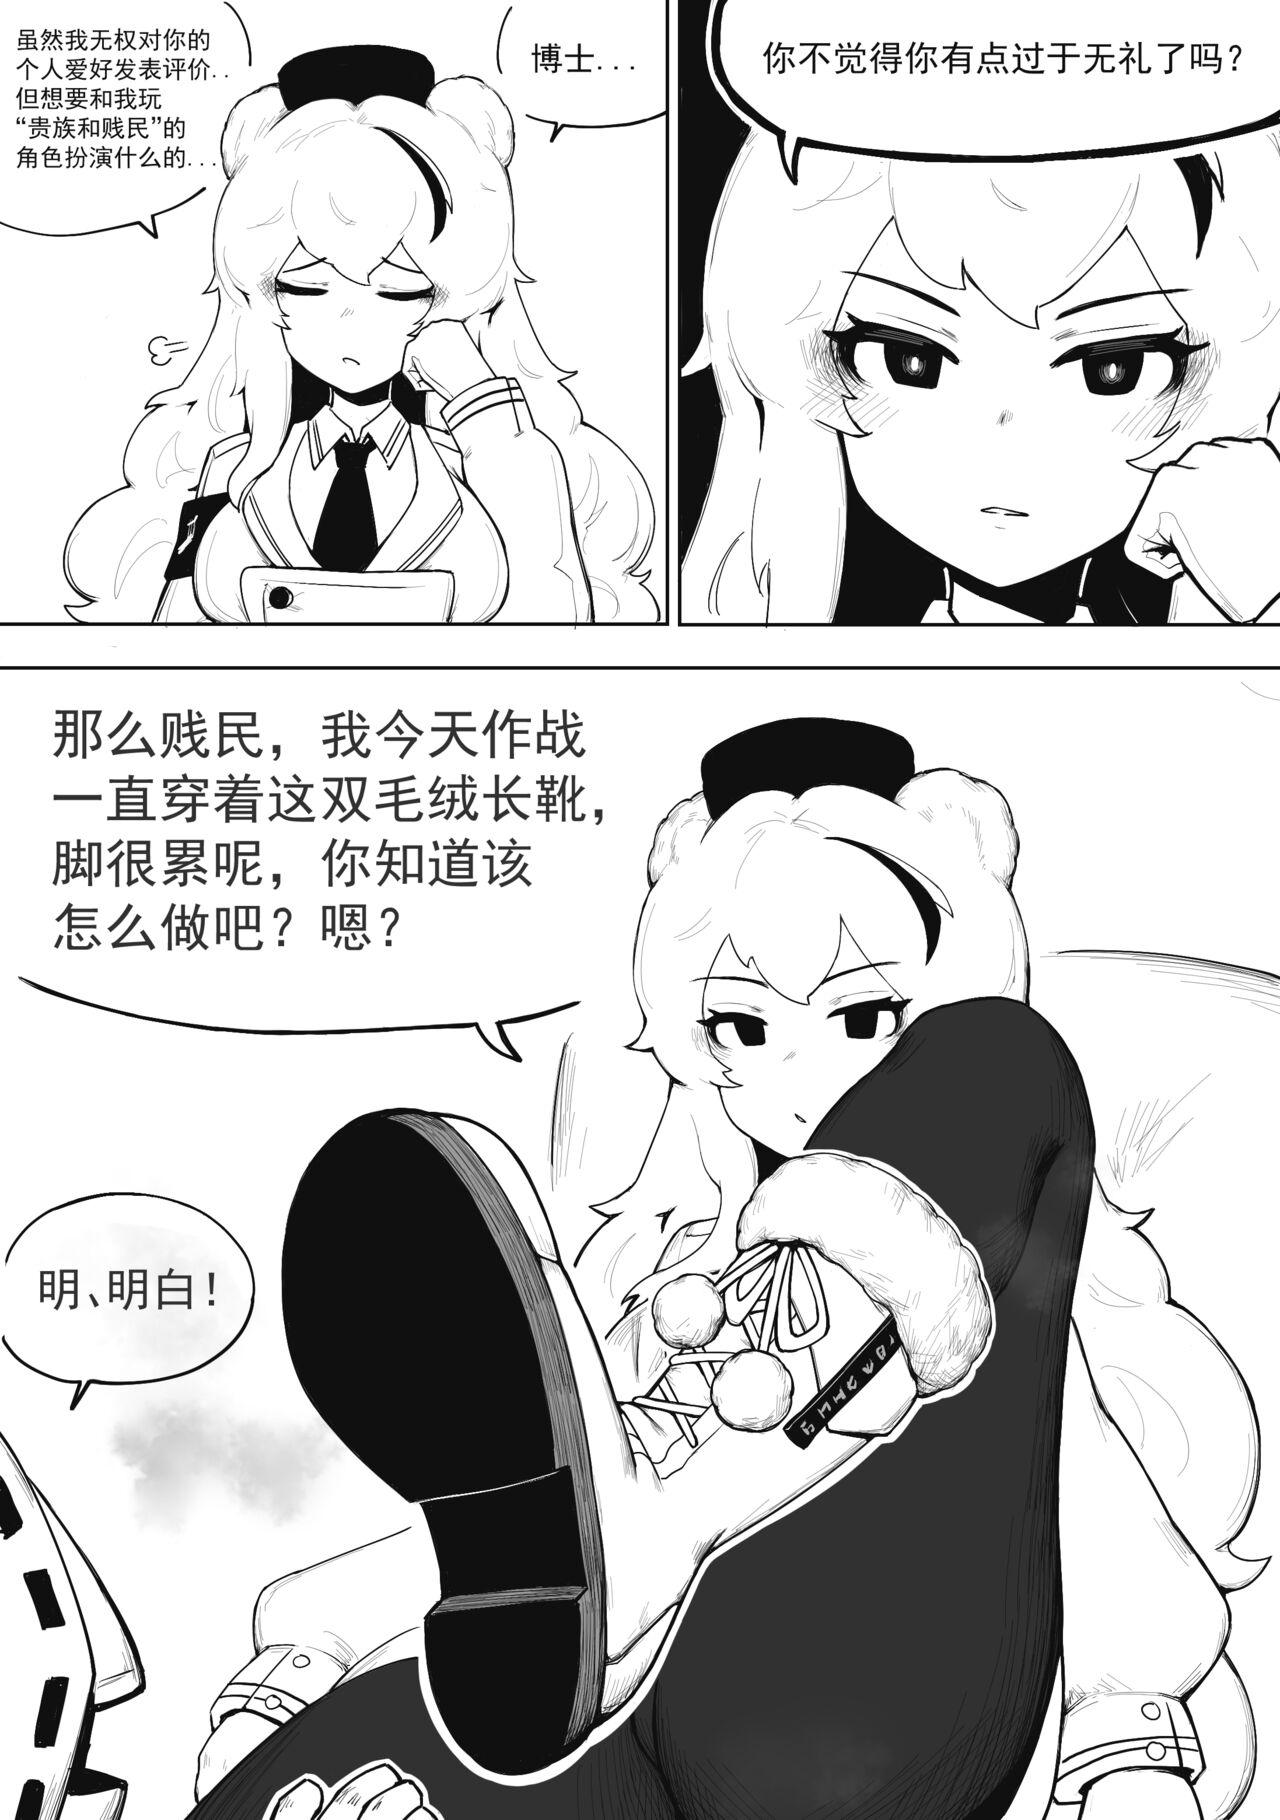 Tiny Girl 澄澈之冰 早露 - Arknights Athletic - Page 1